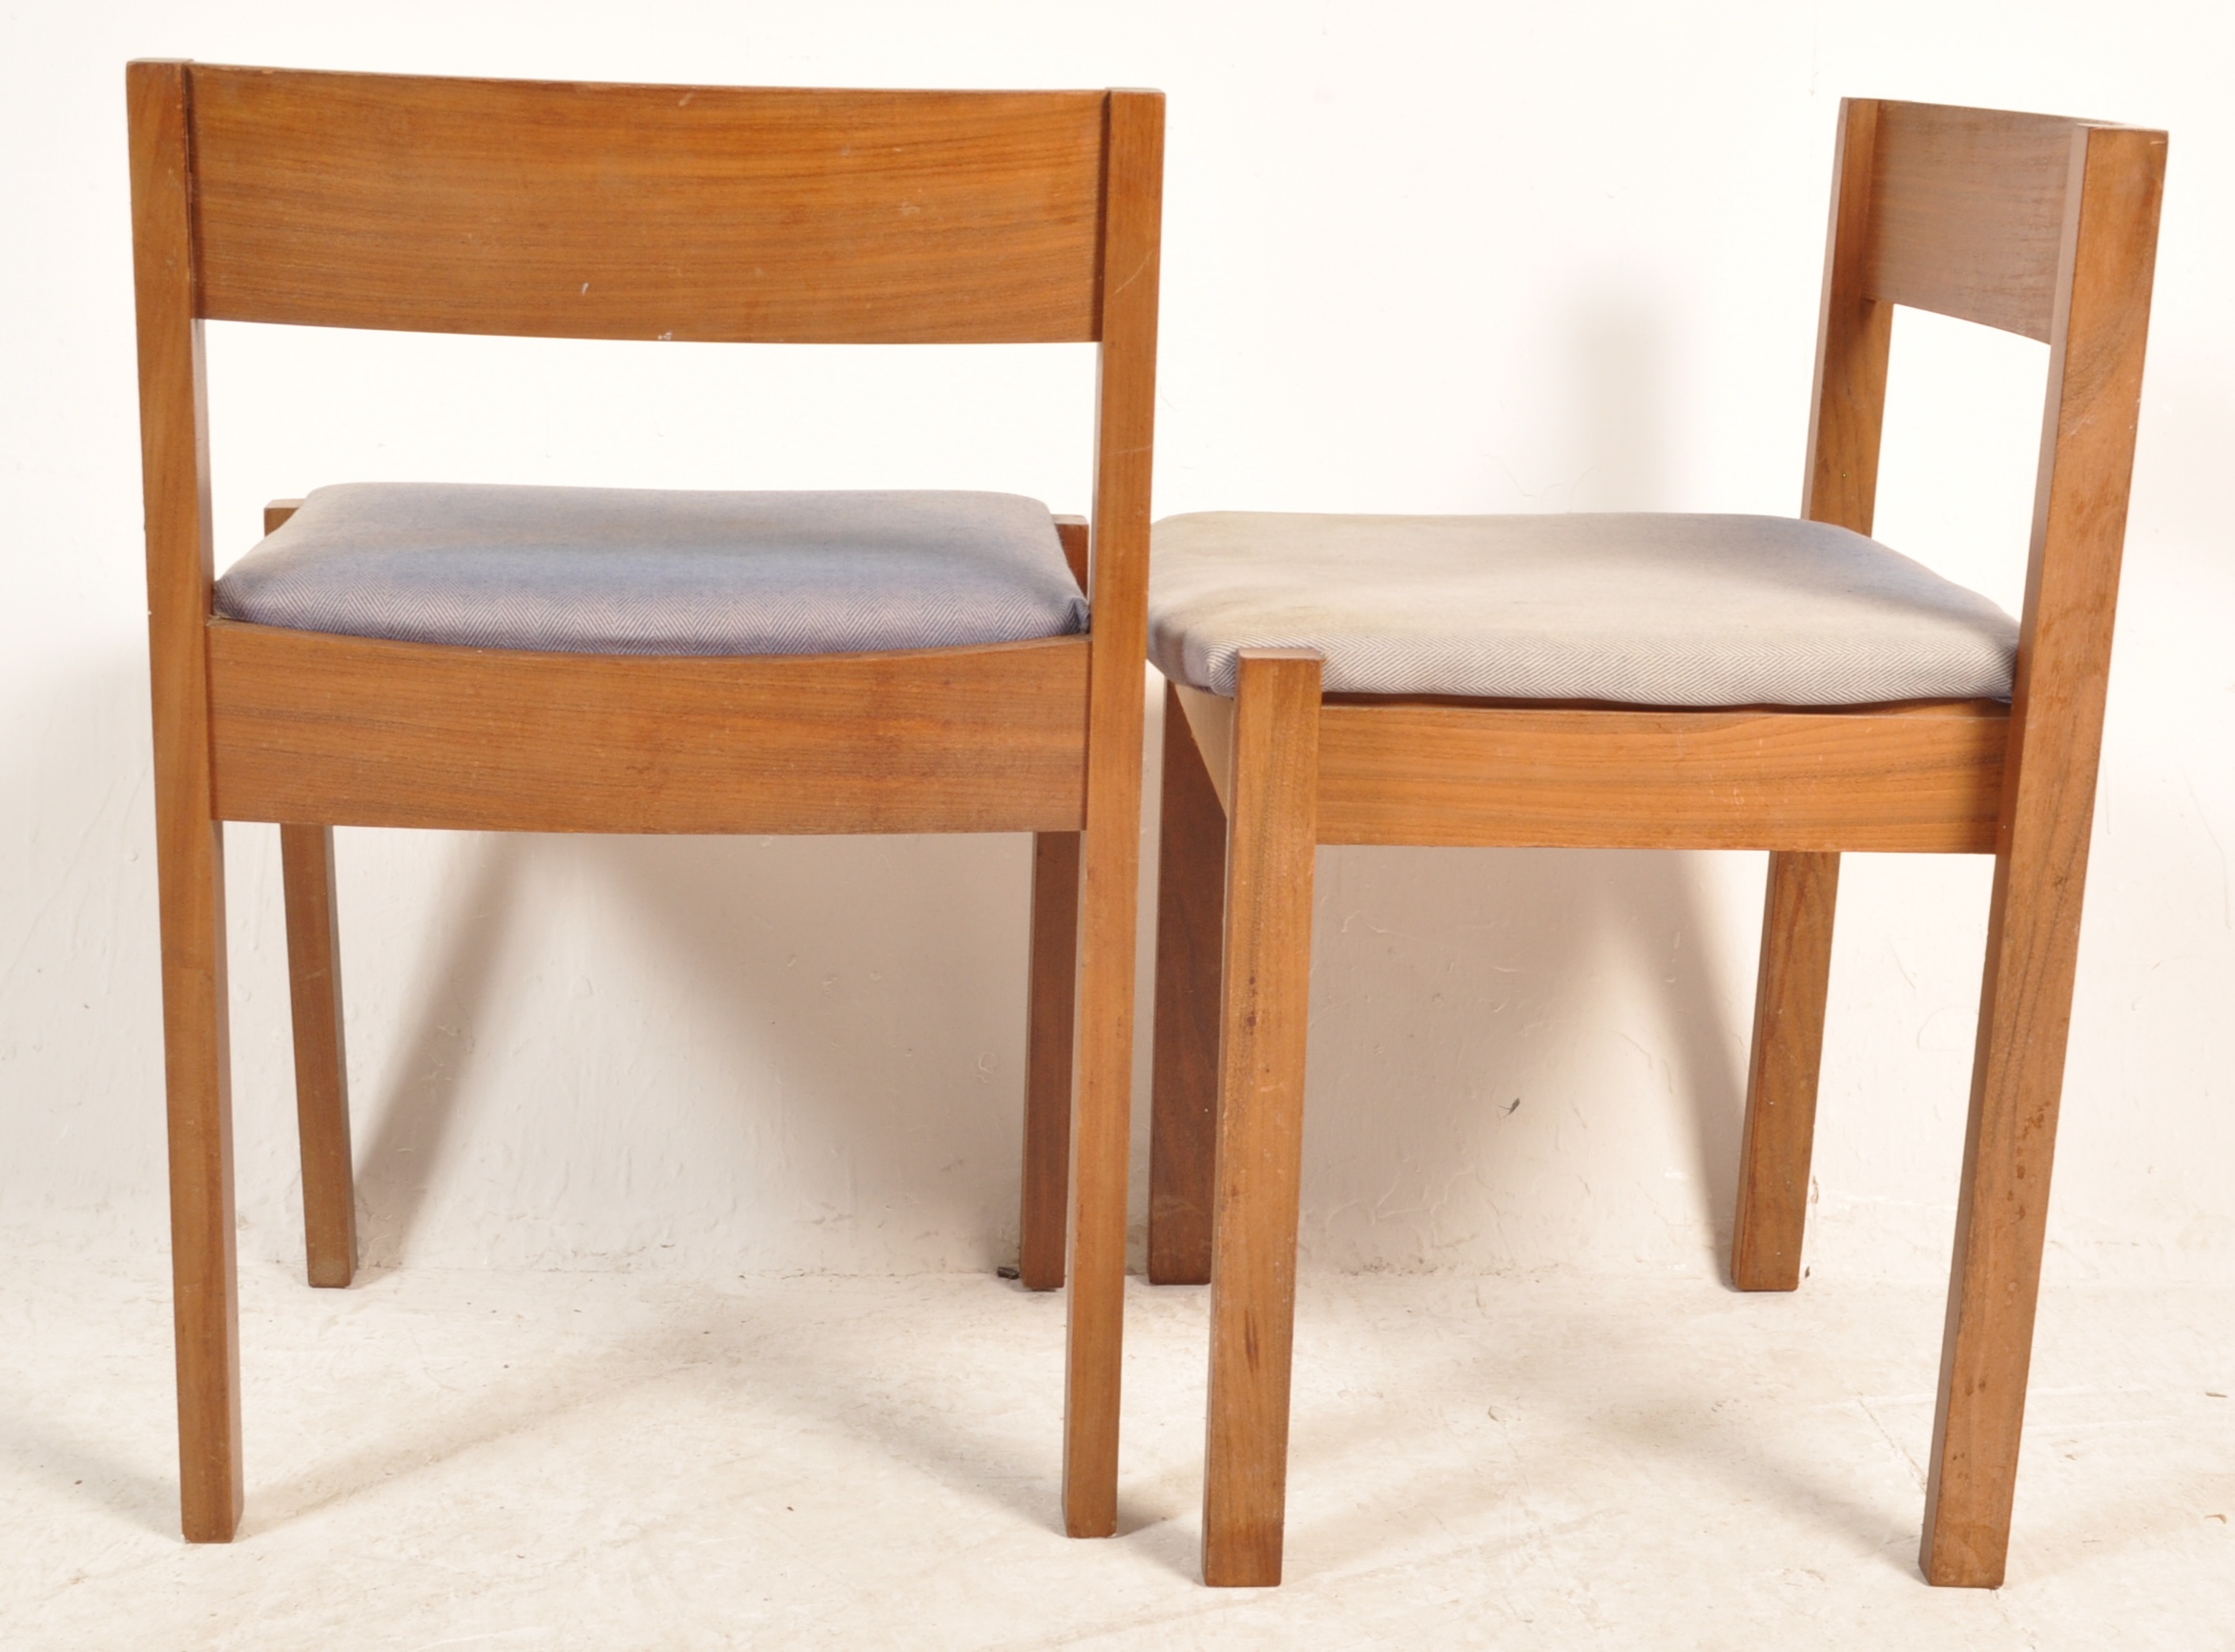 MEREDEW - BRITISH MODERN DESIGN - RETRO VINTAGE TABLE AND CHAIRS - Image 8 of 8